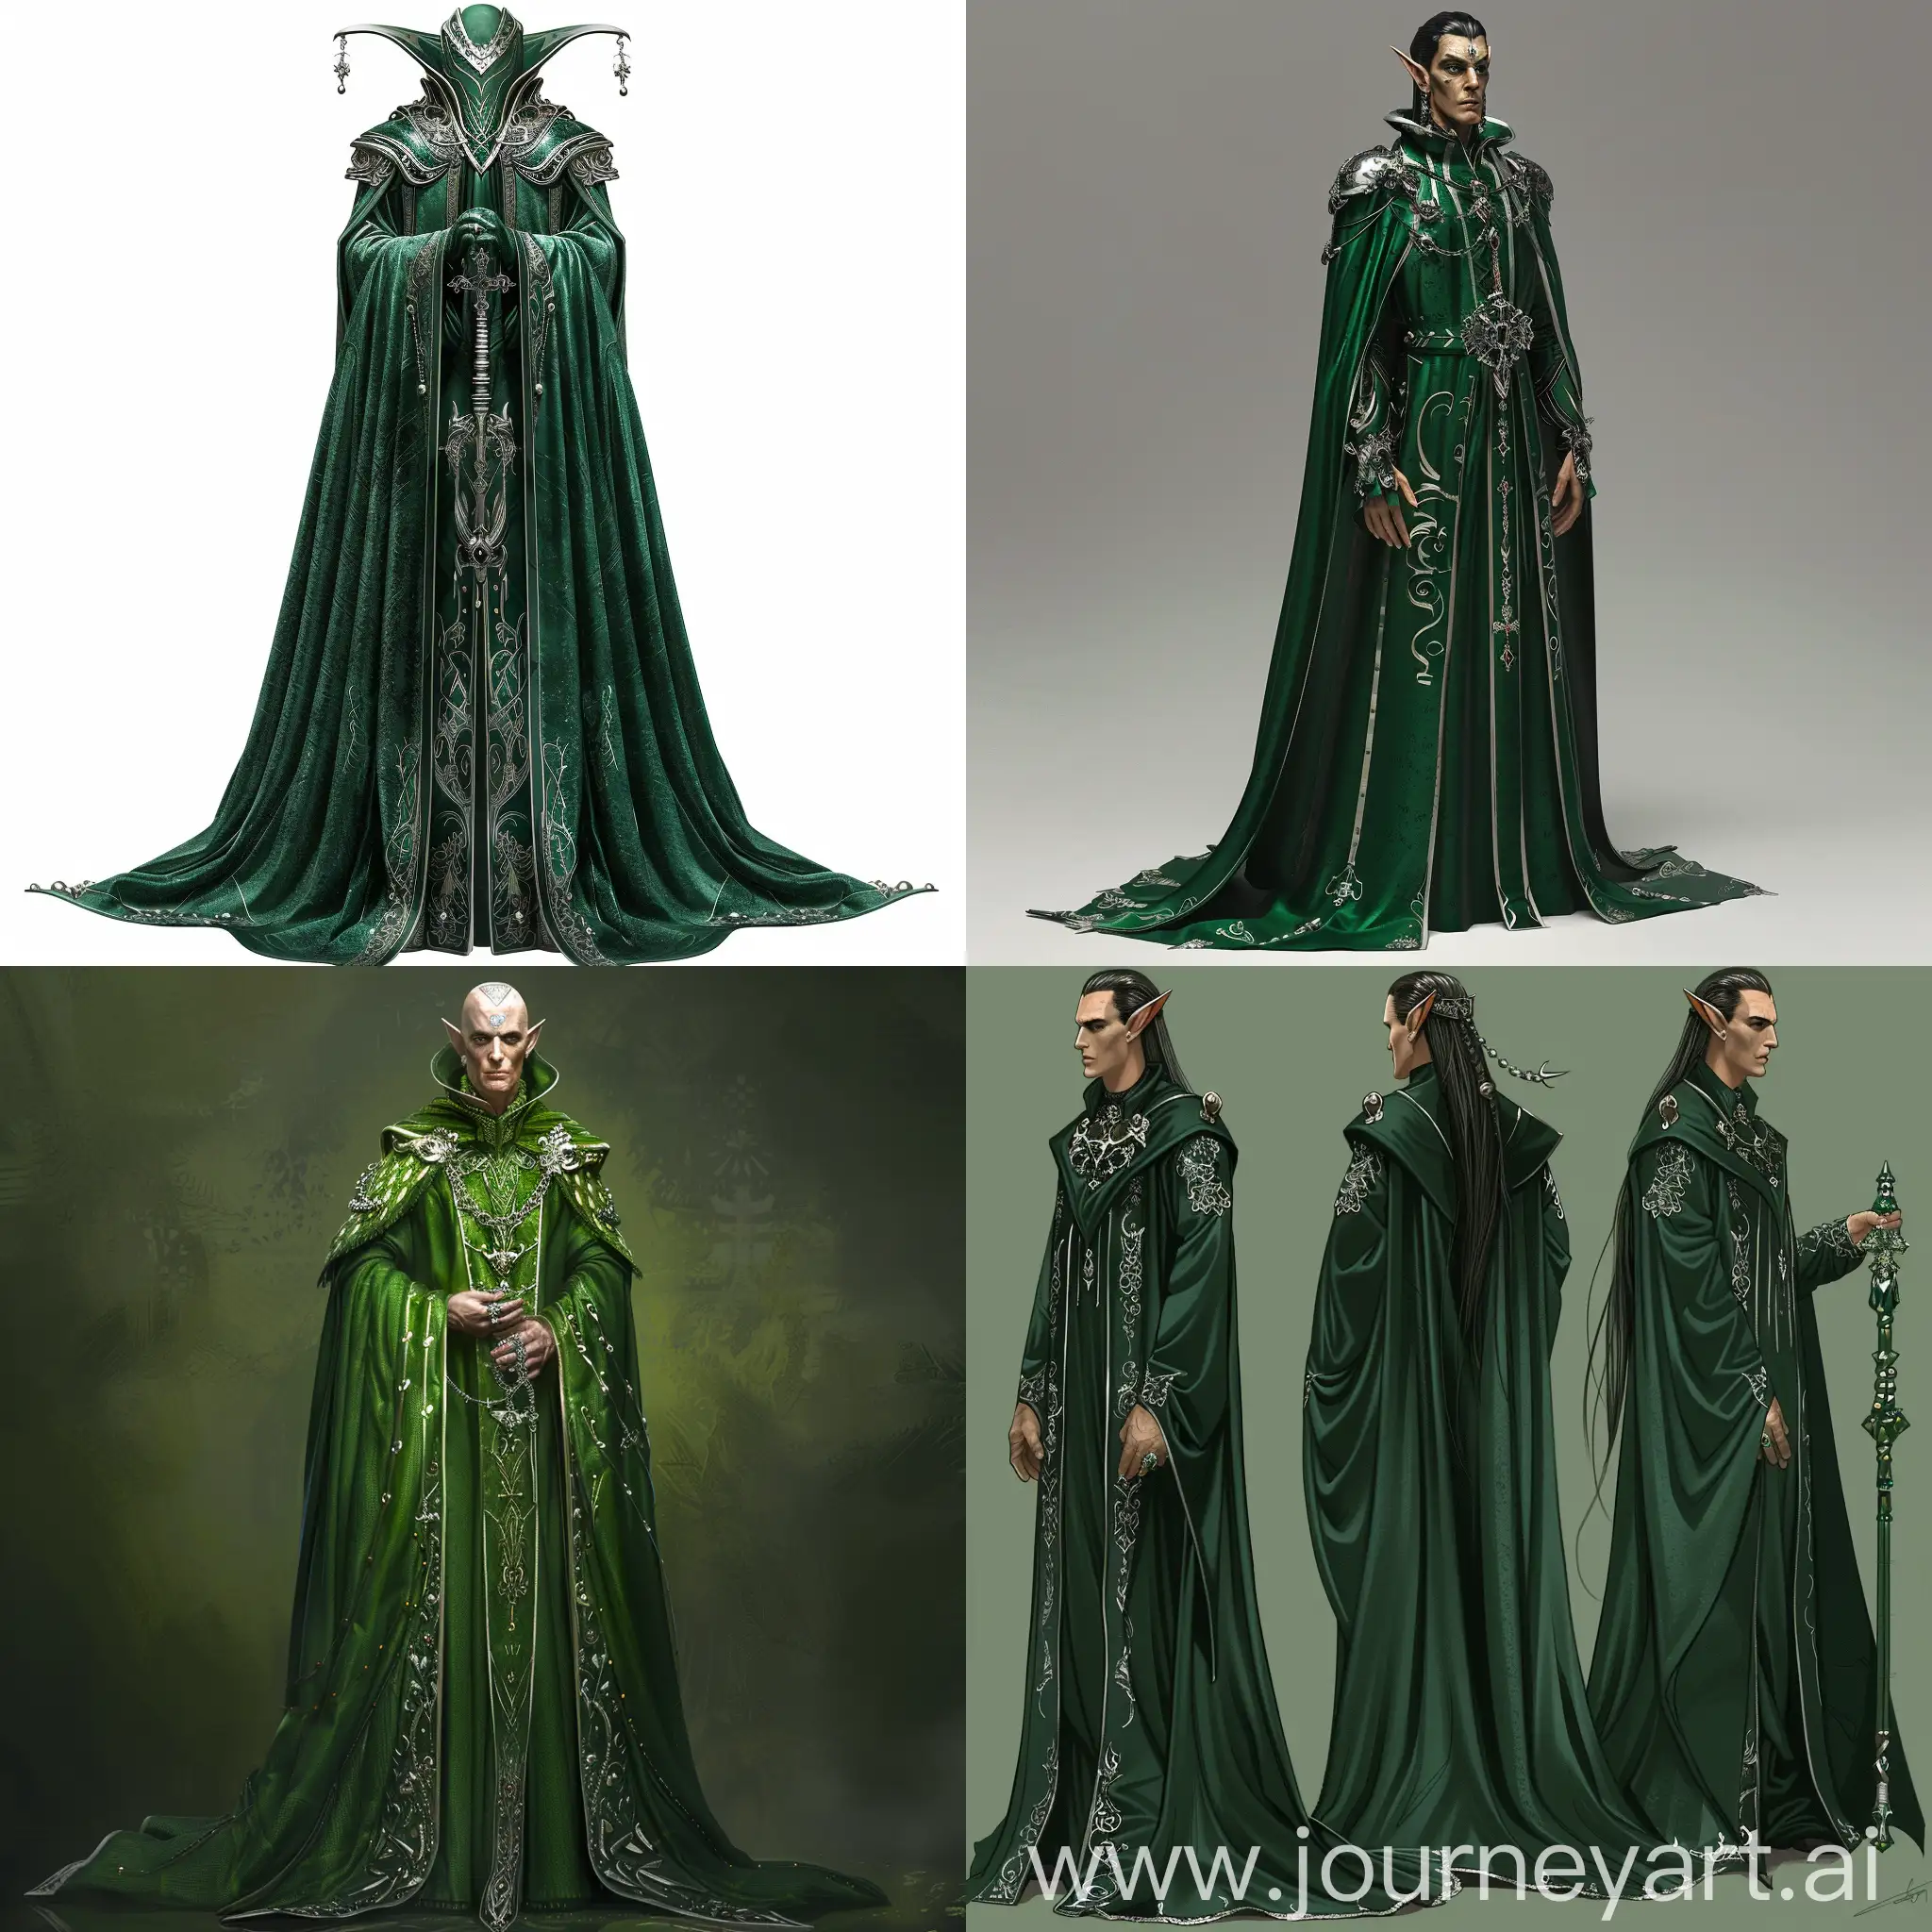 Fantasy-Male-Elf-Bishop-in-Rich-Green-Robes-with-Silver-Accessories-and-Ornaments